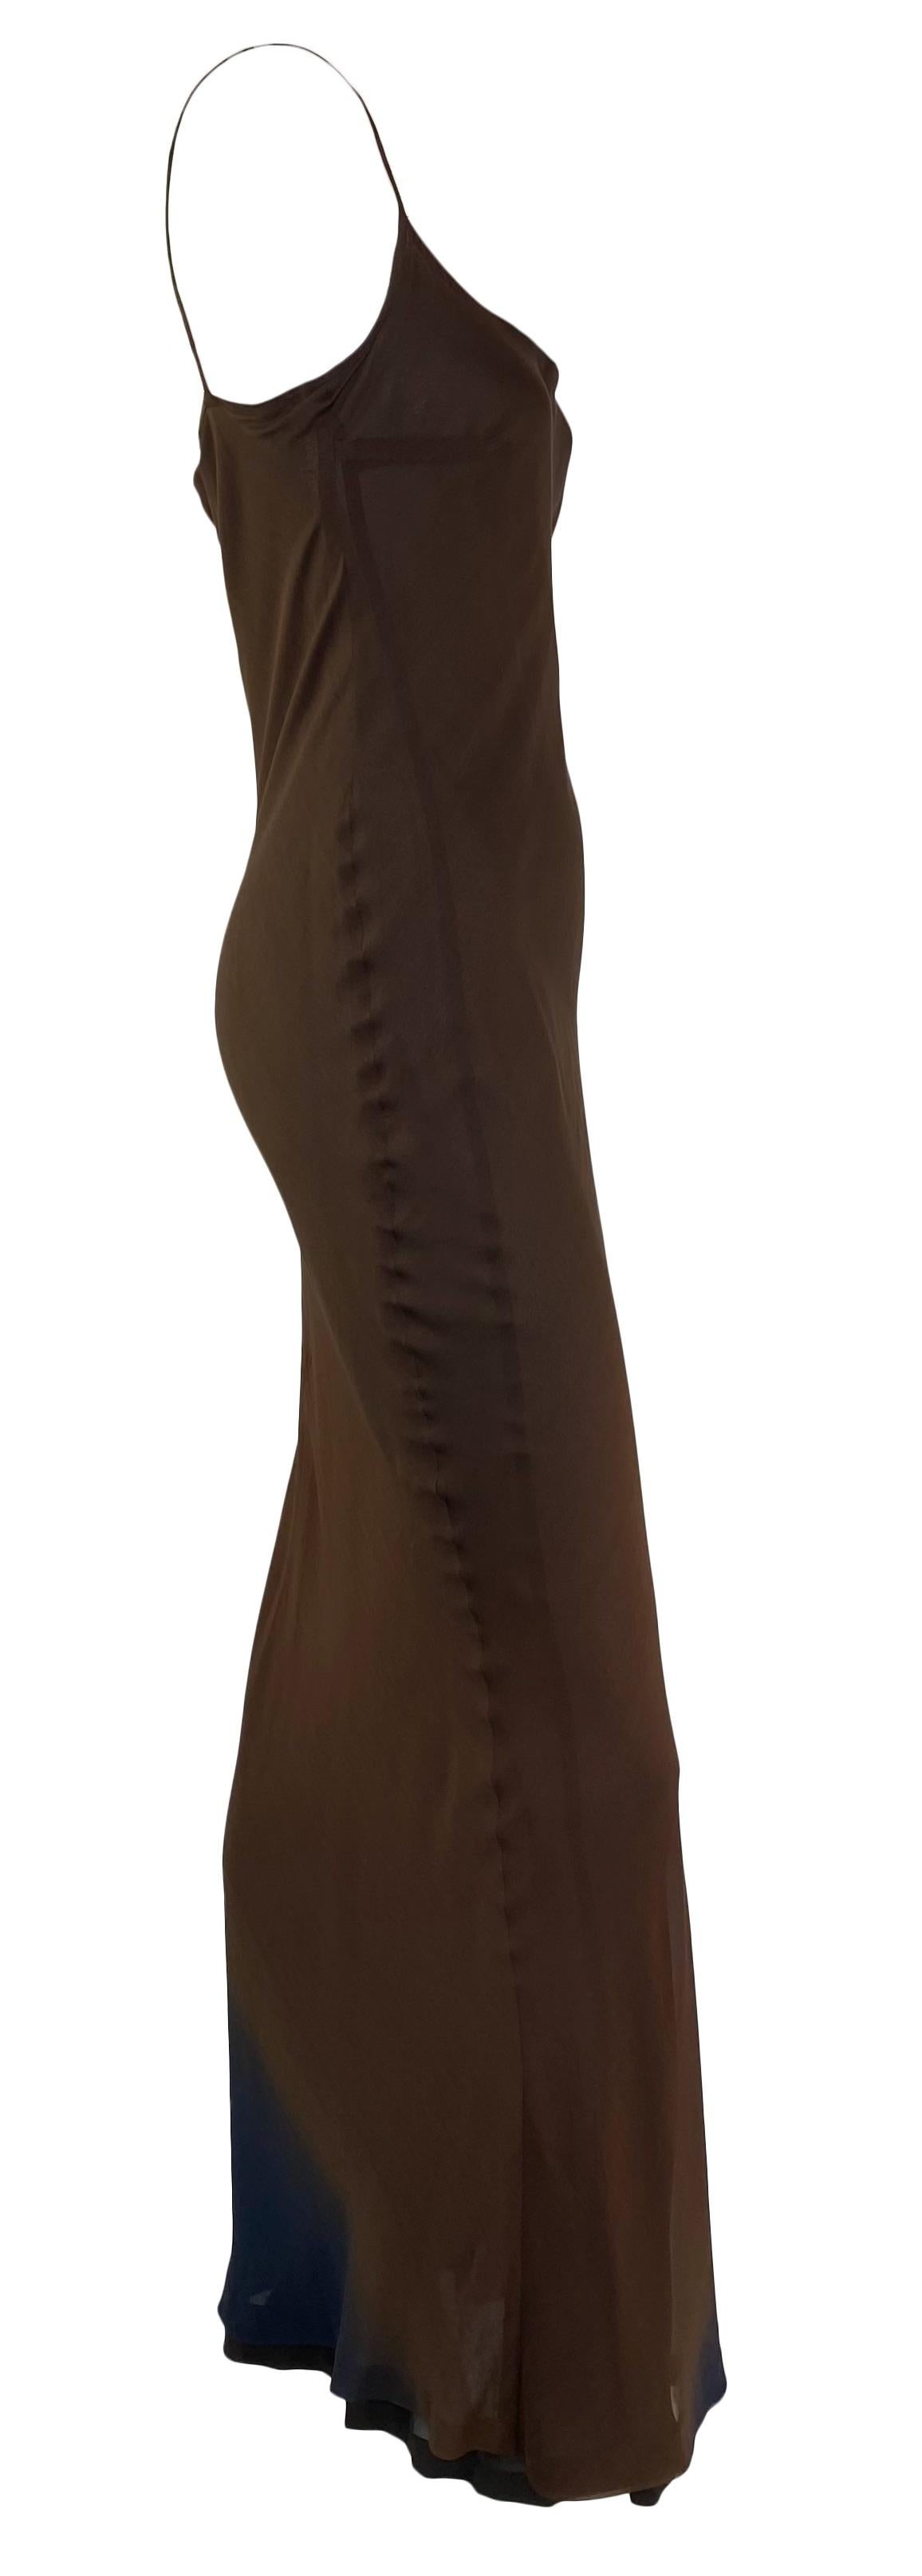 S/S 1997 Gucci by Tom Ford Brown Blue Sheer Silk Slip Gown Column Dress In Good Condition For Sale In West Hollywood, CA